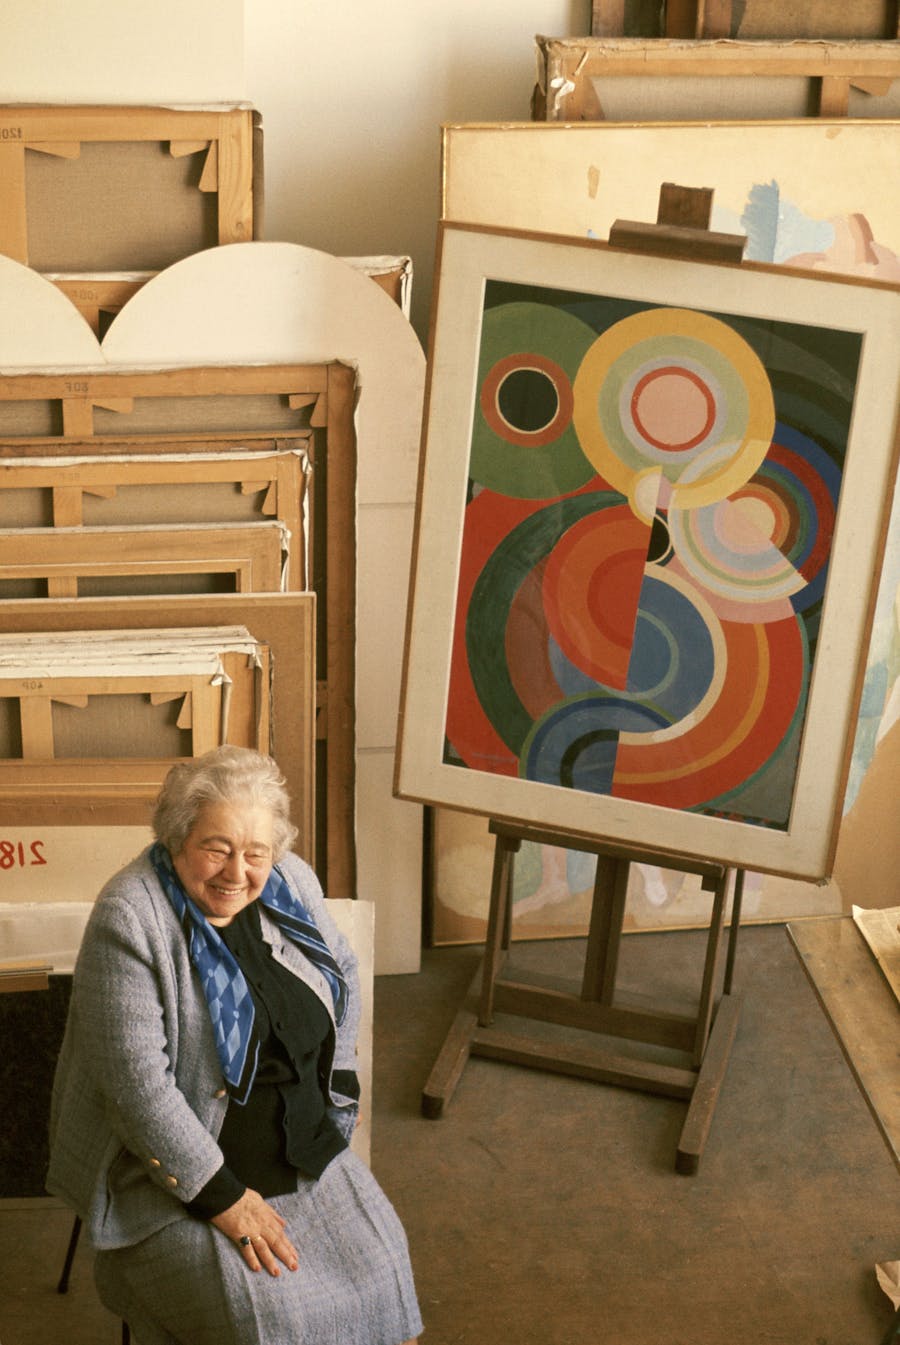  Sonia Delaunay in 1976. (Photo by Monique JACOT/Gamma-Rapho via Getty Images)